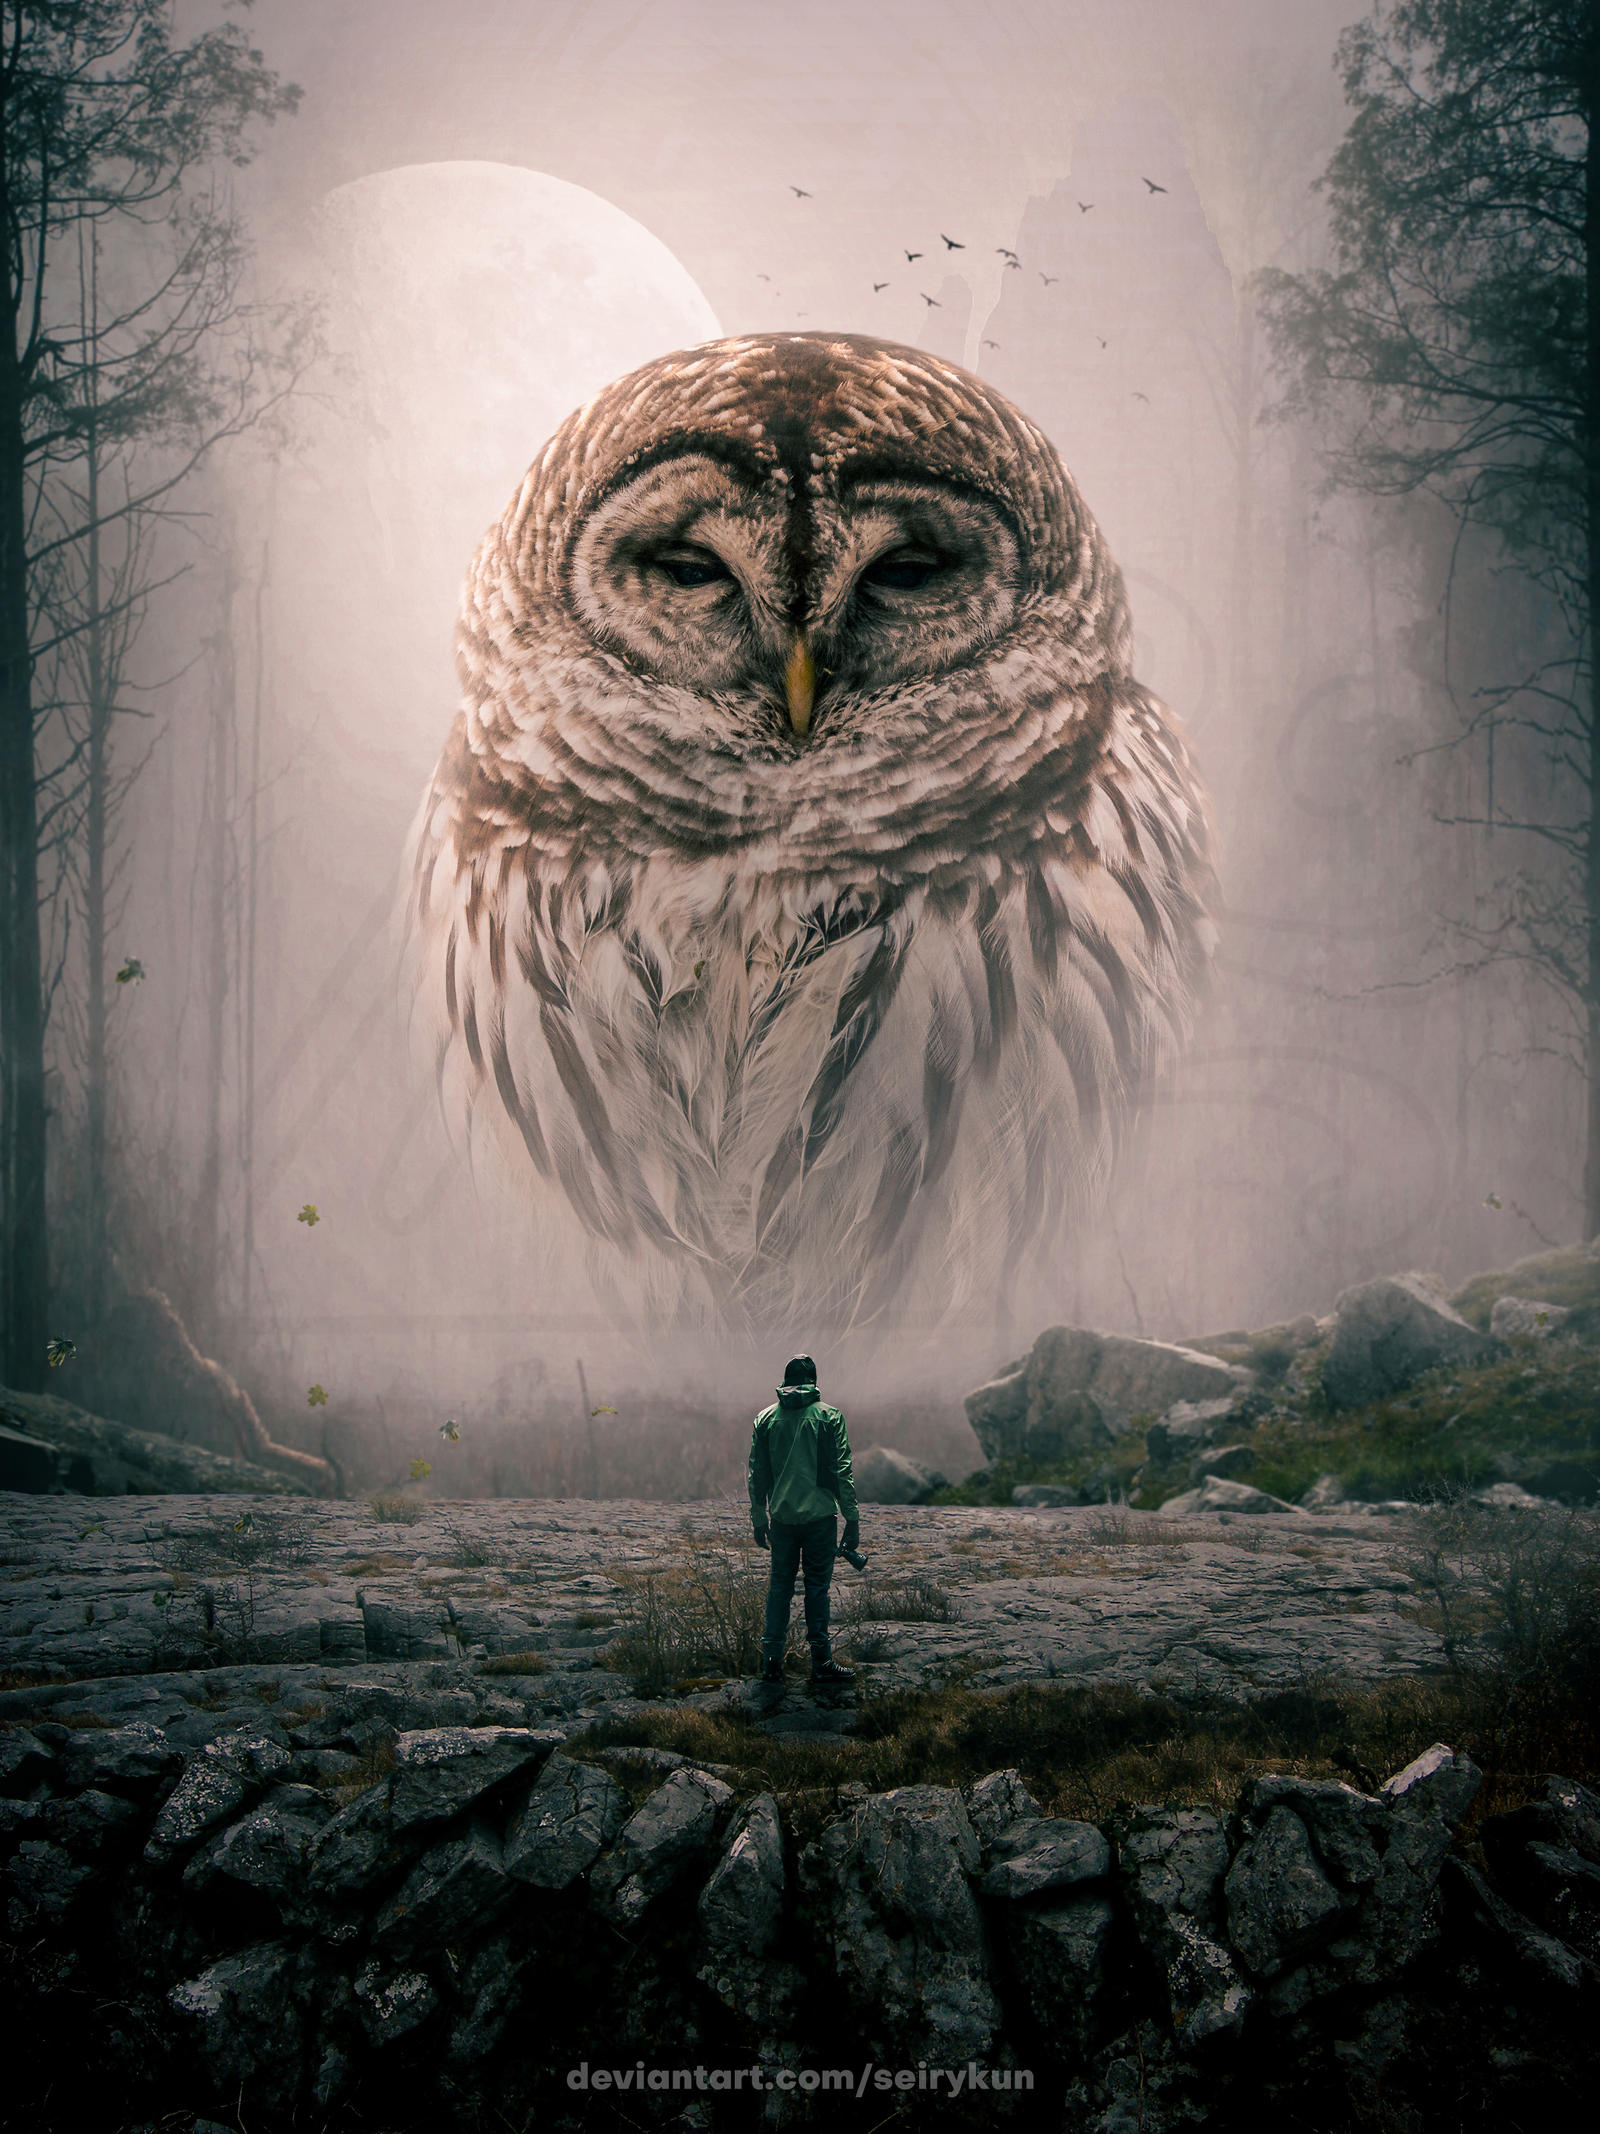 Photomontage - Owl in the Forest